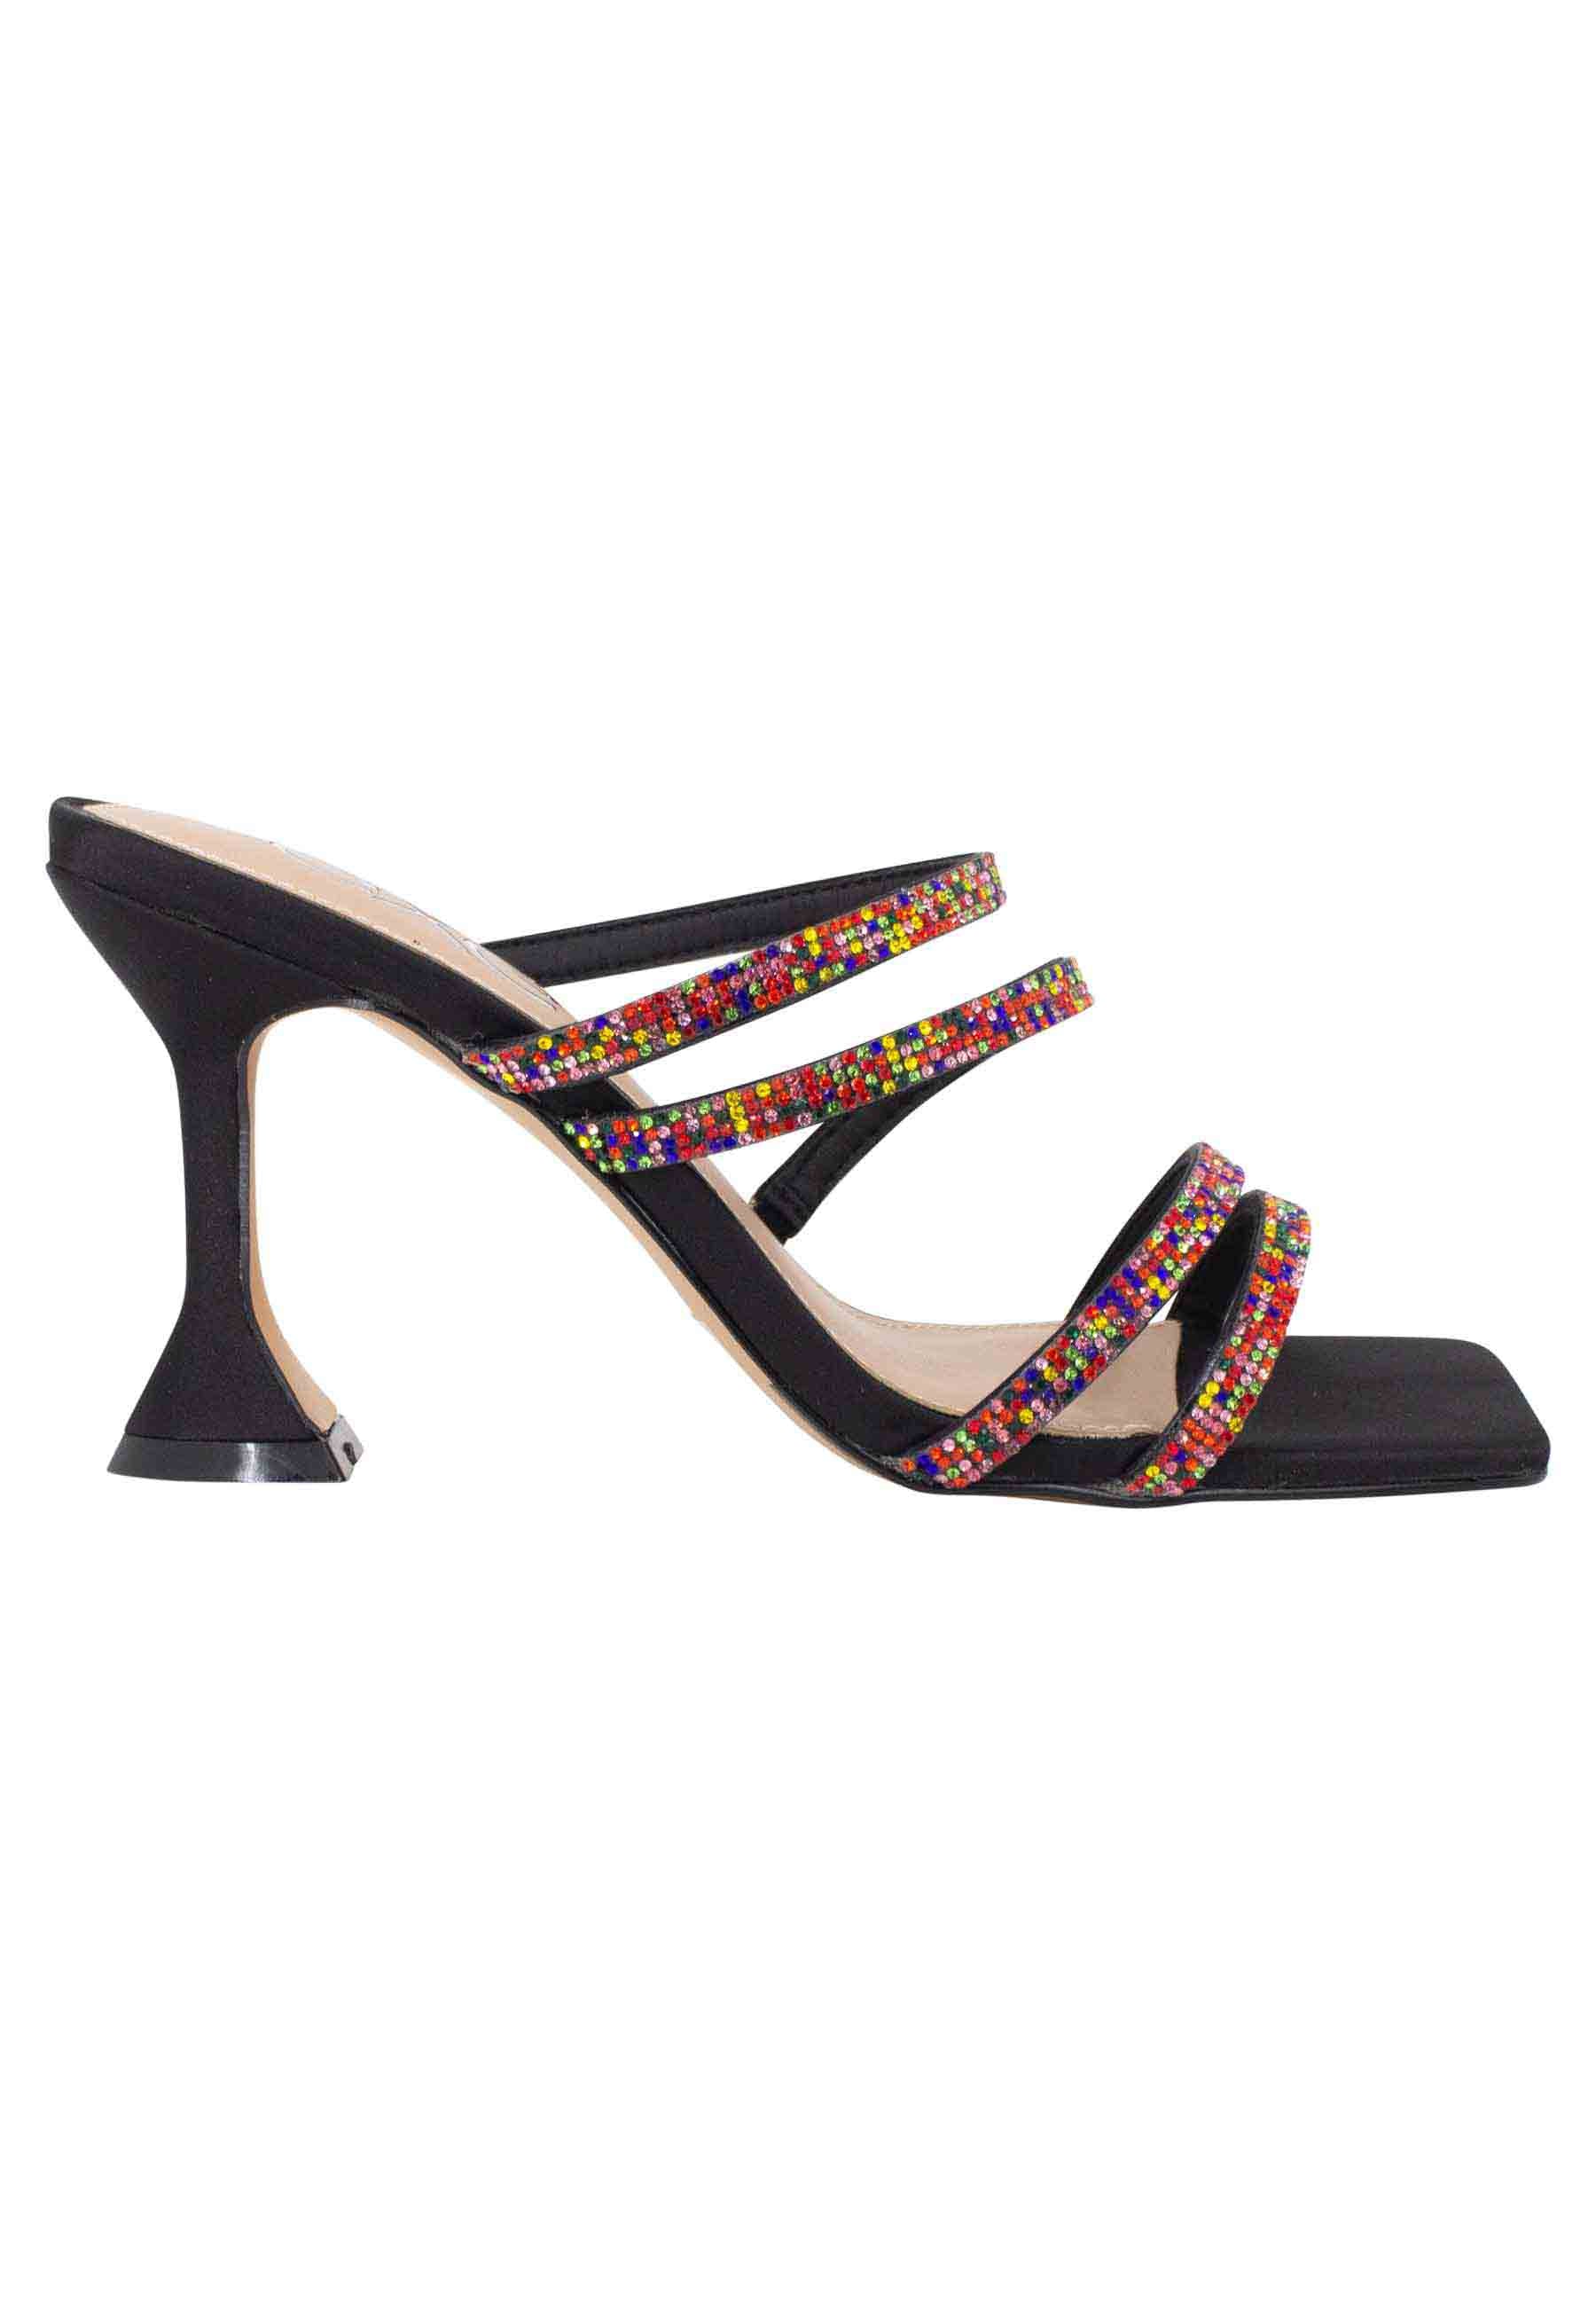 Women's sandals in black fabric with high heel and multicolored rhinestones